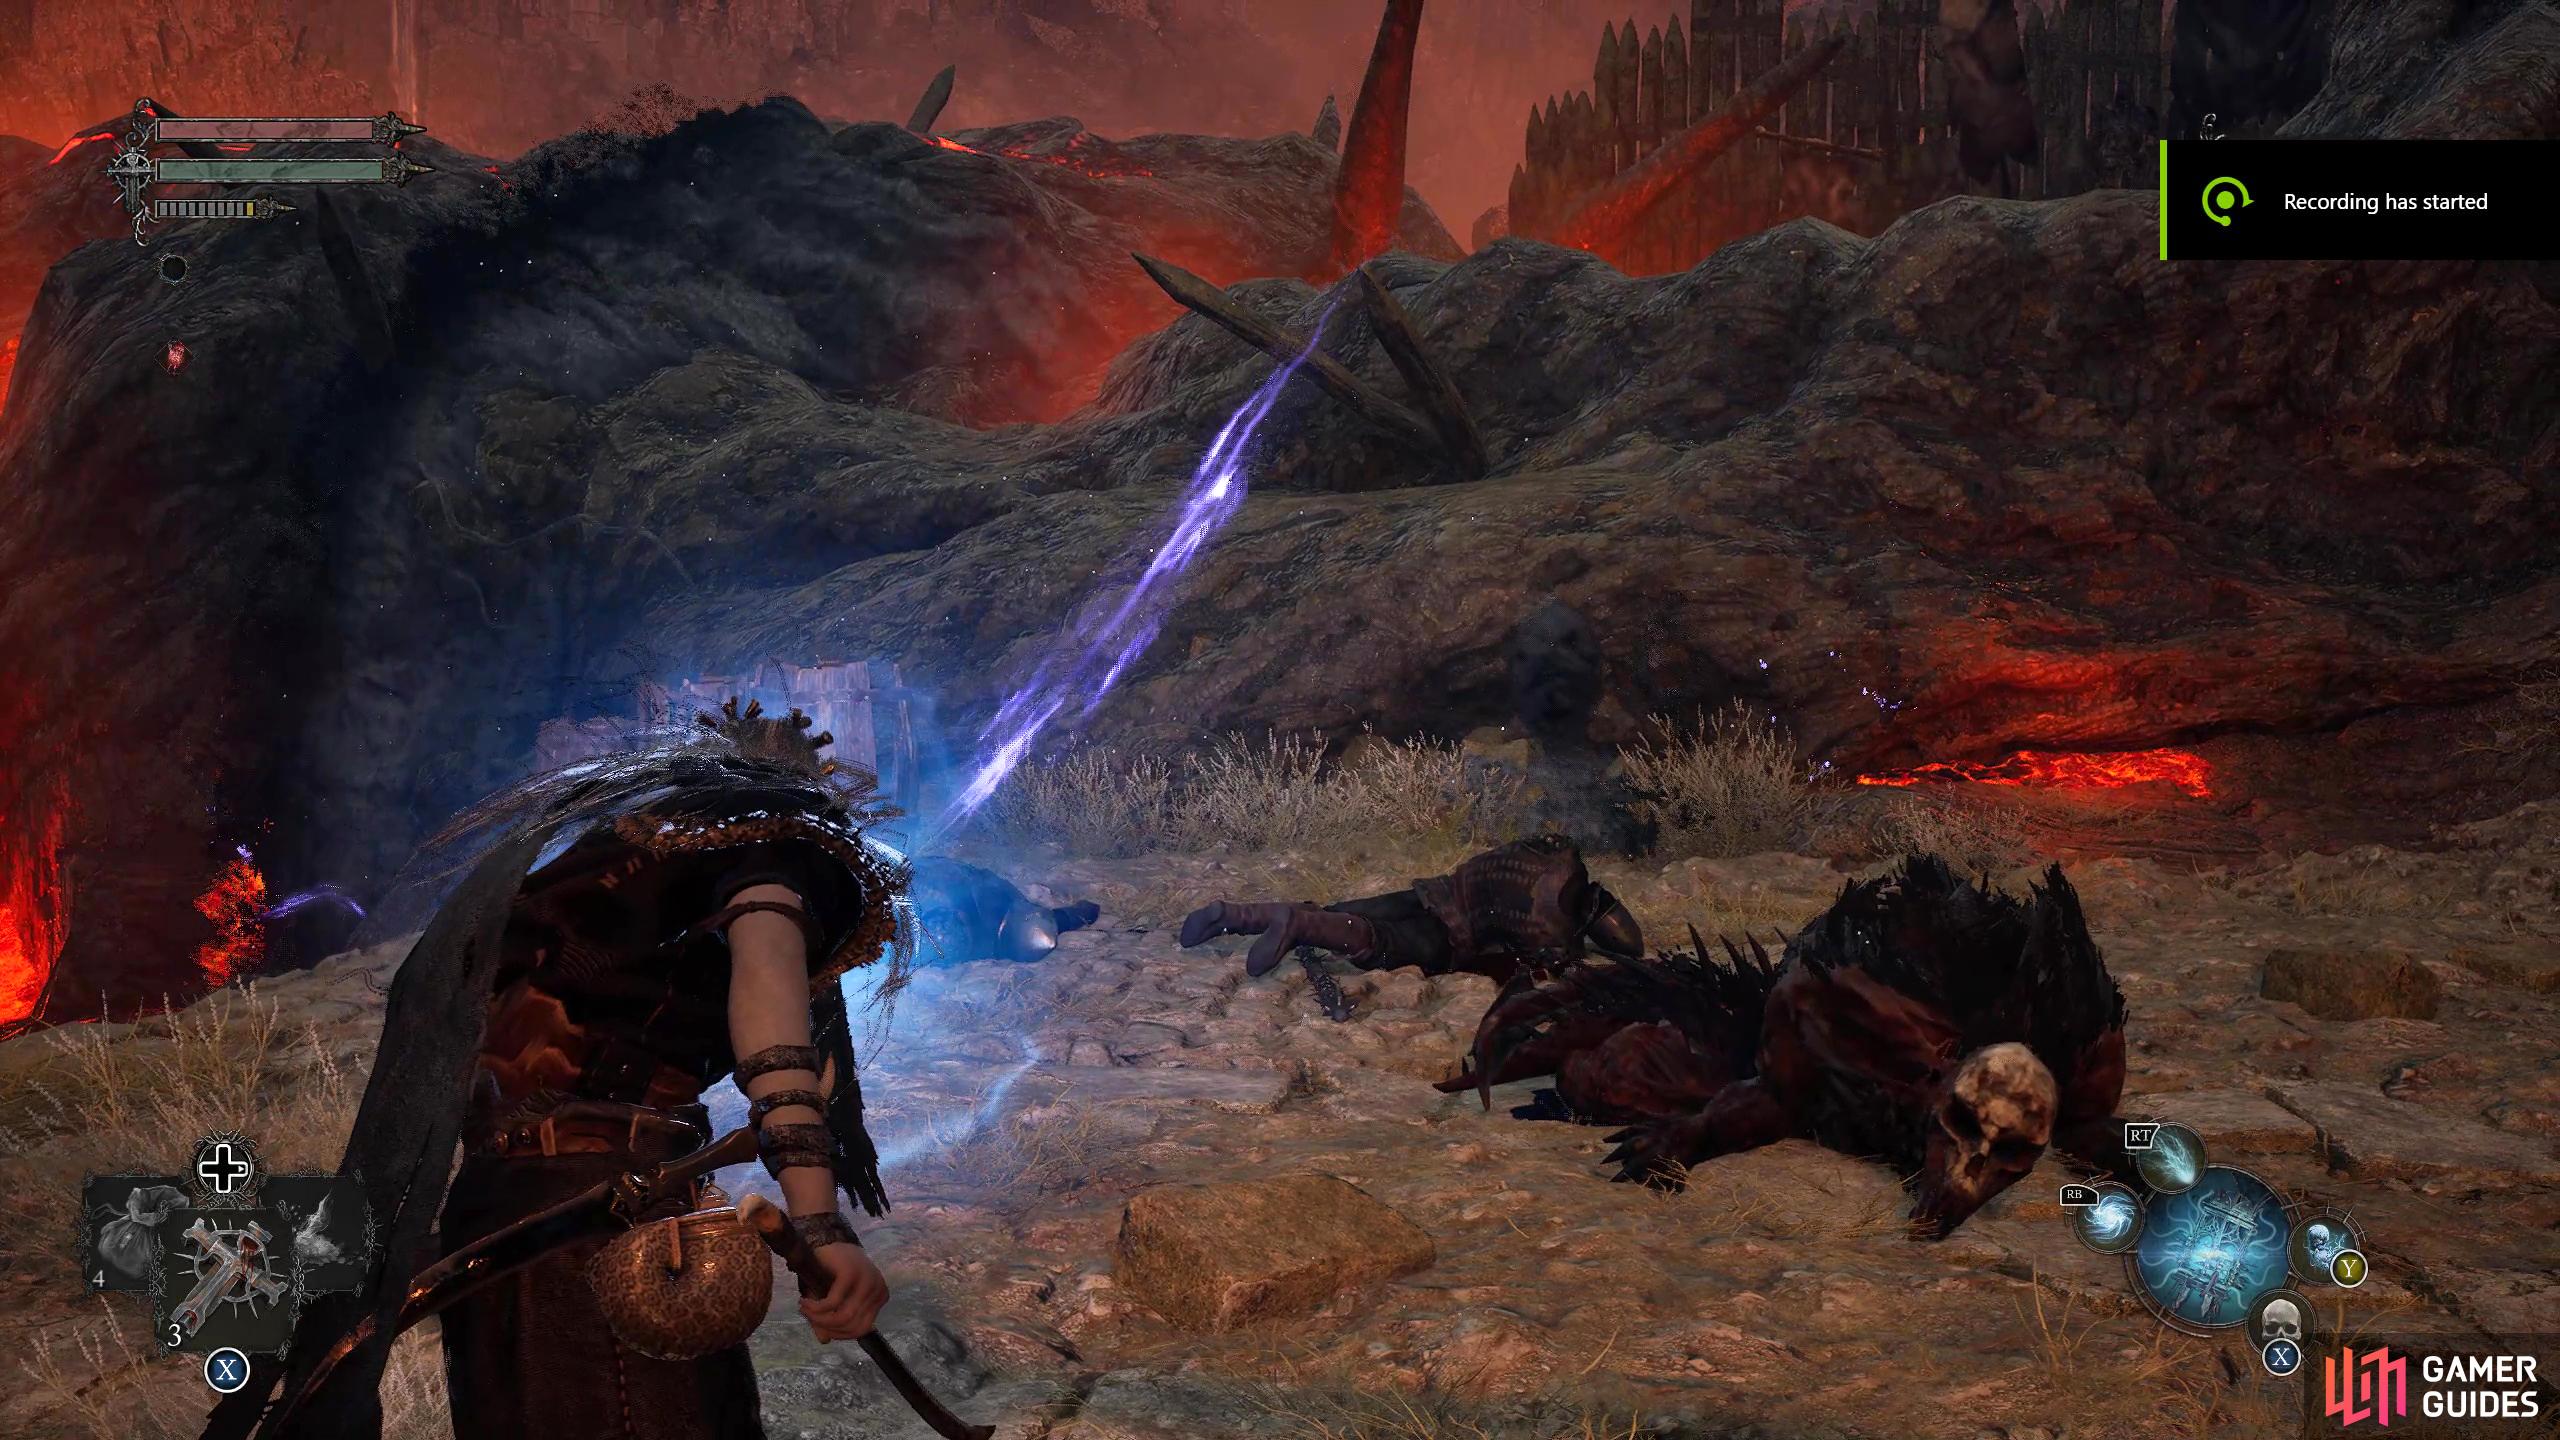 New Lords of the Fallen gameplay details highlight fluid soulsike